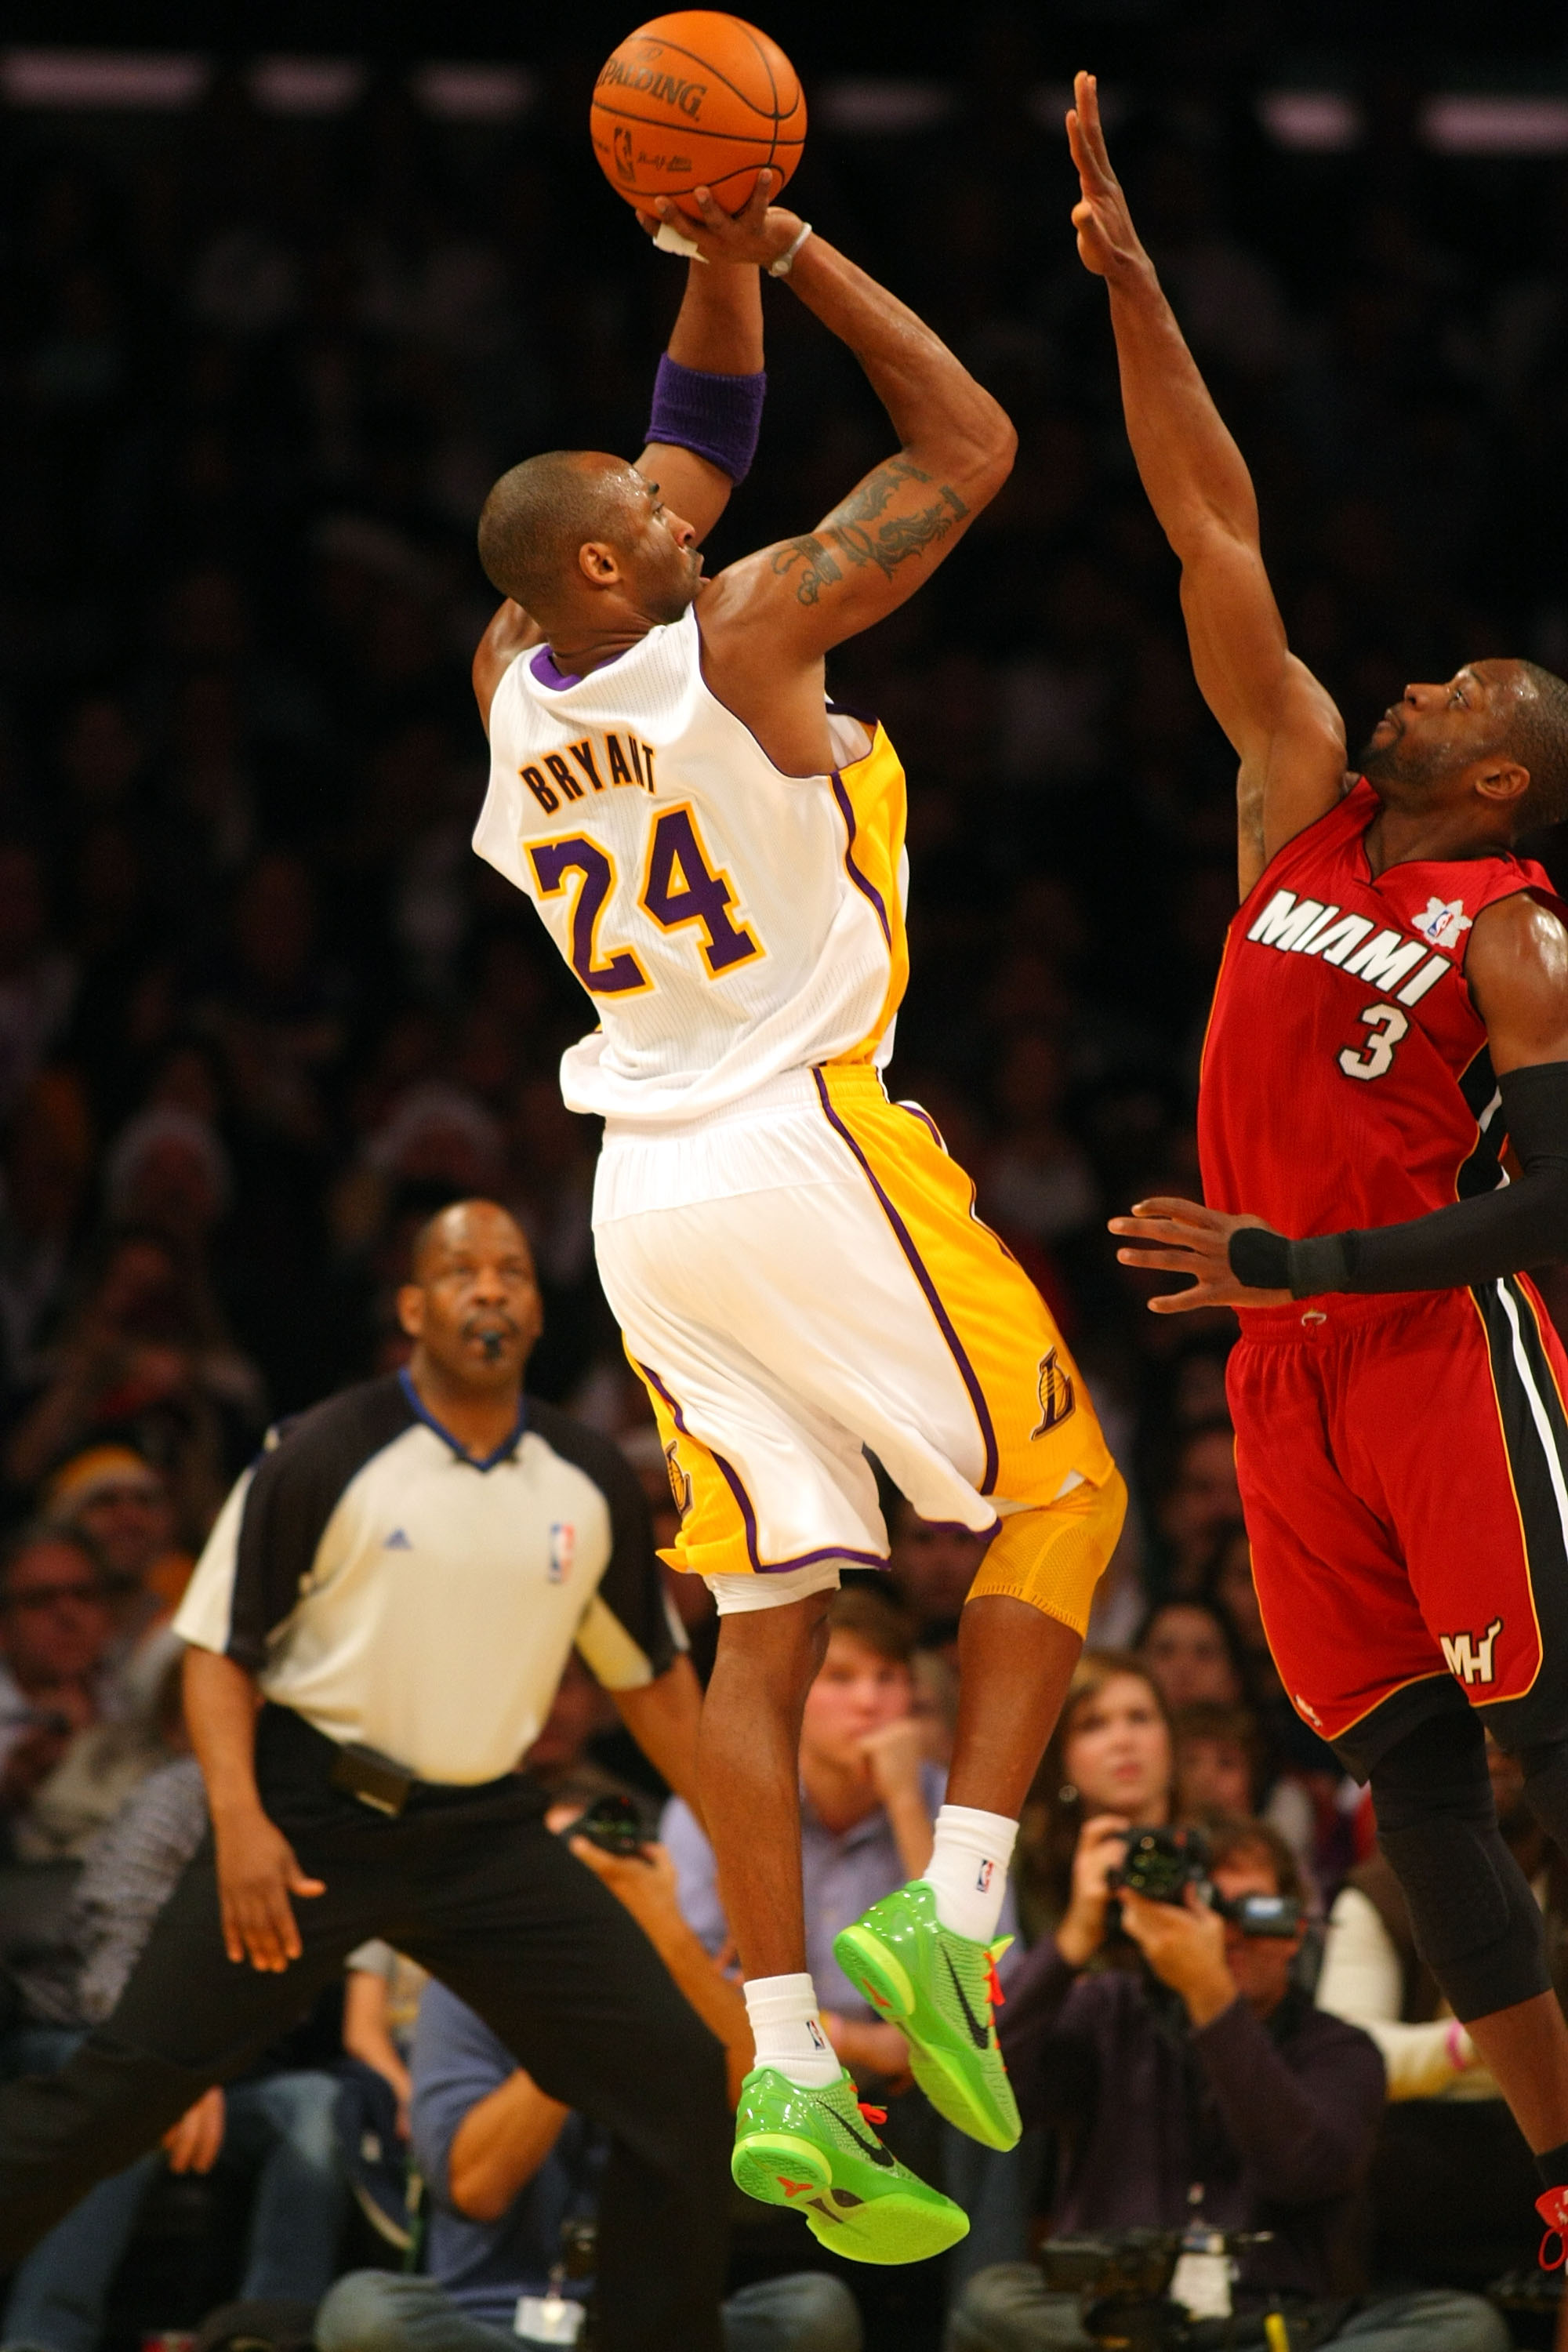 A throwback to when Dwayne Wade playfully interrupted Kobe